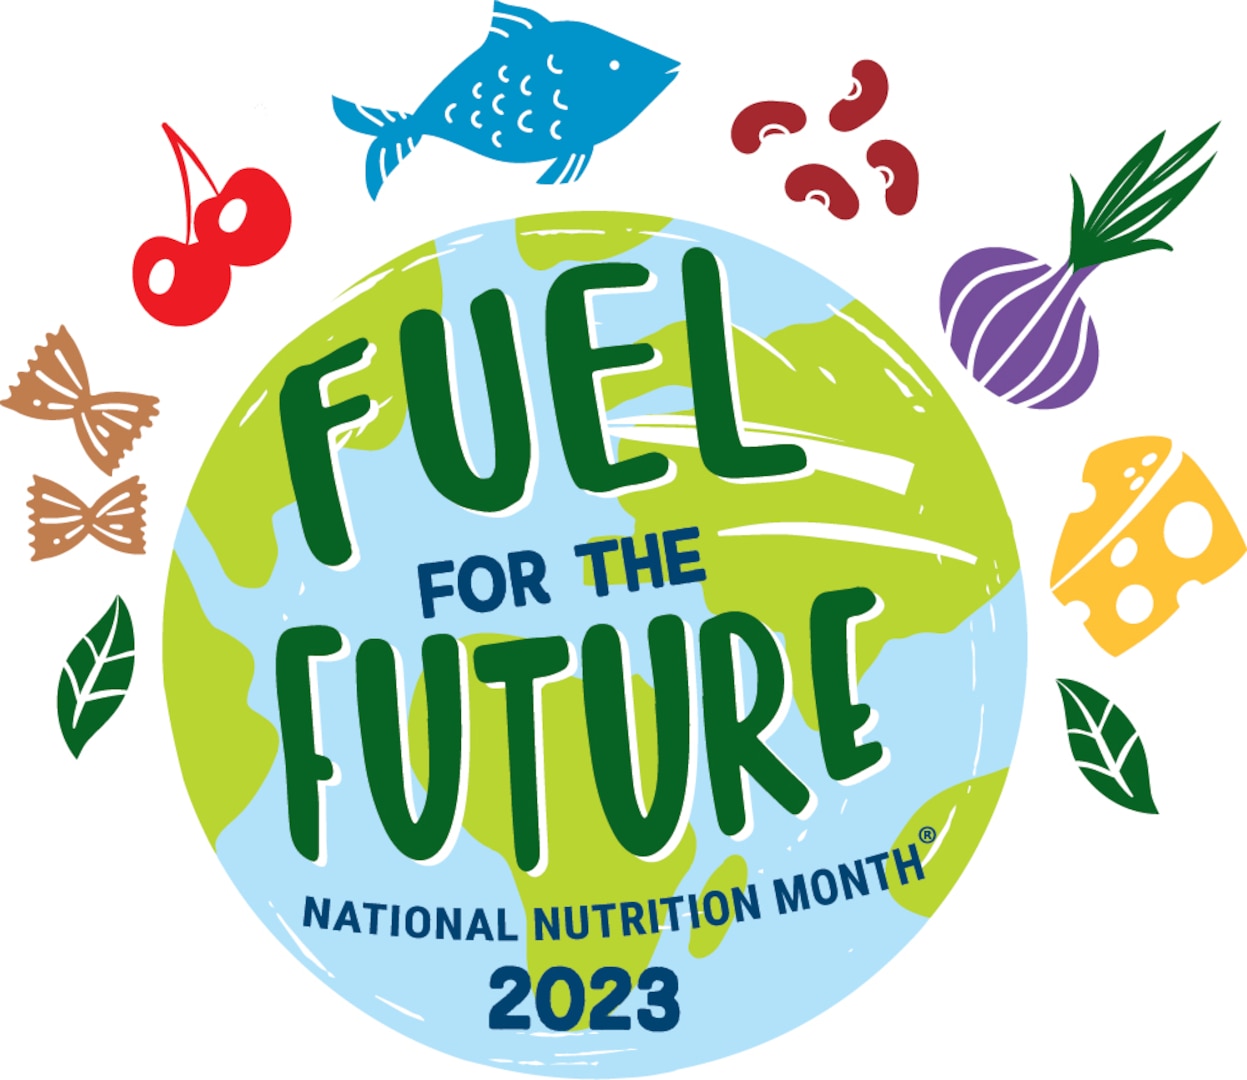 NATIONAL NUTRITION MONTH: Nutrition needs are important at every stage of life